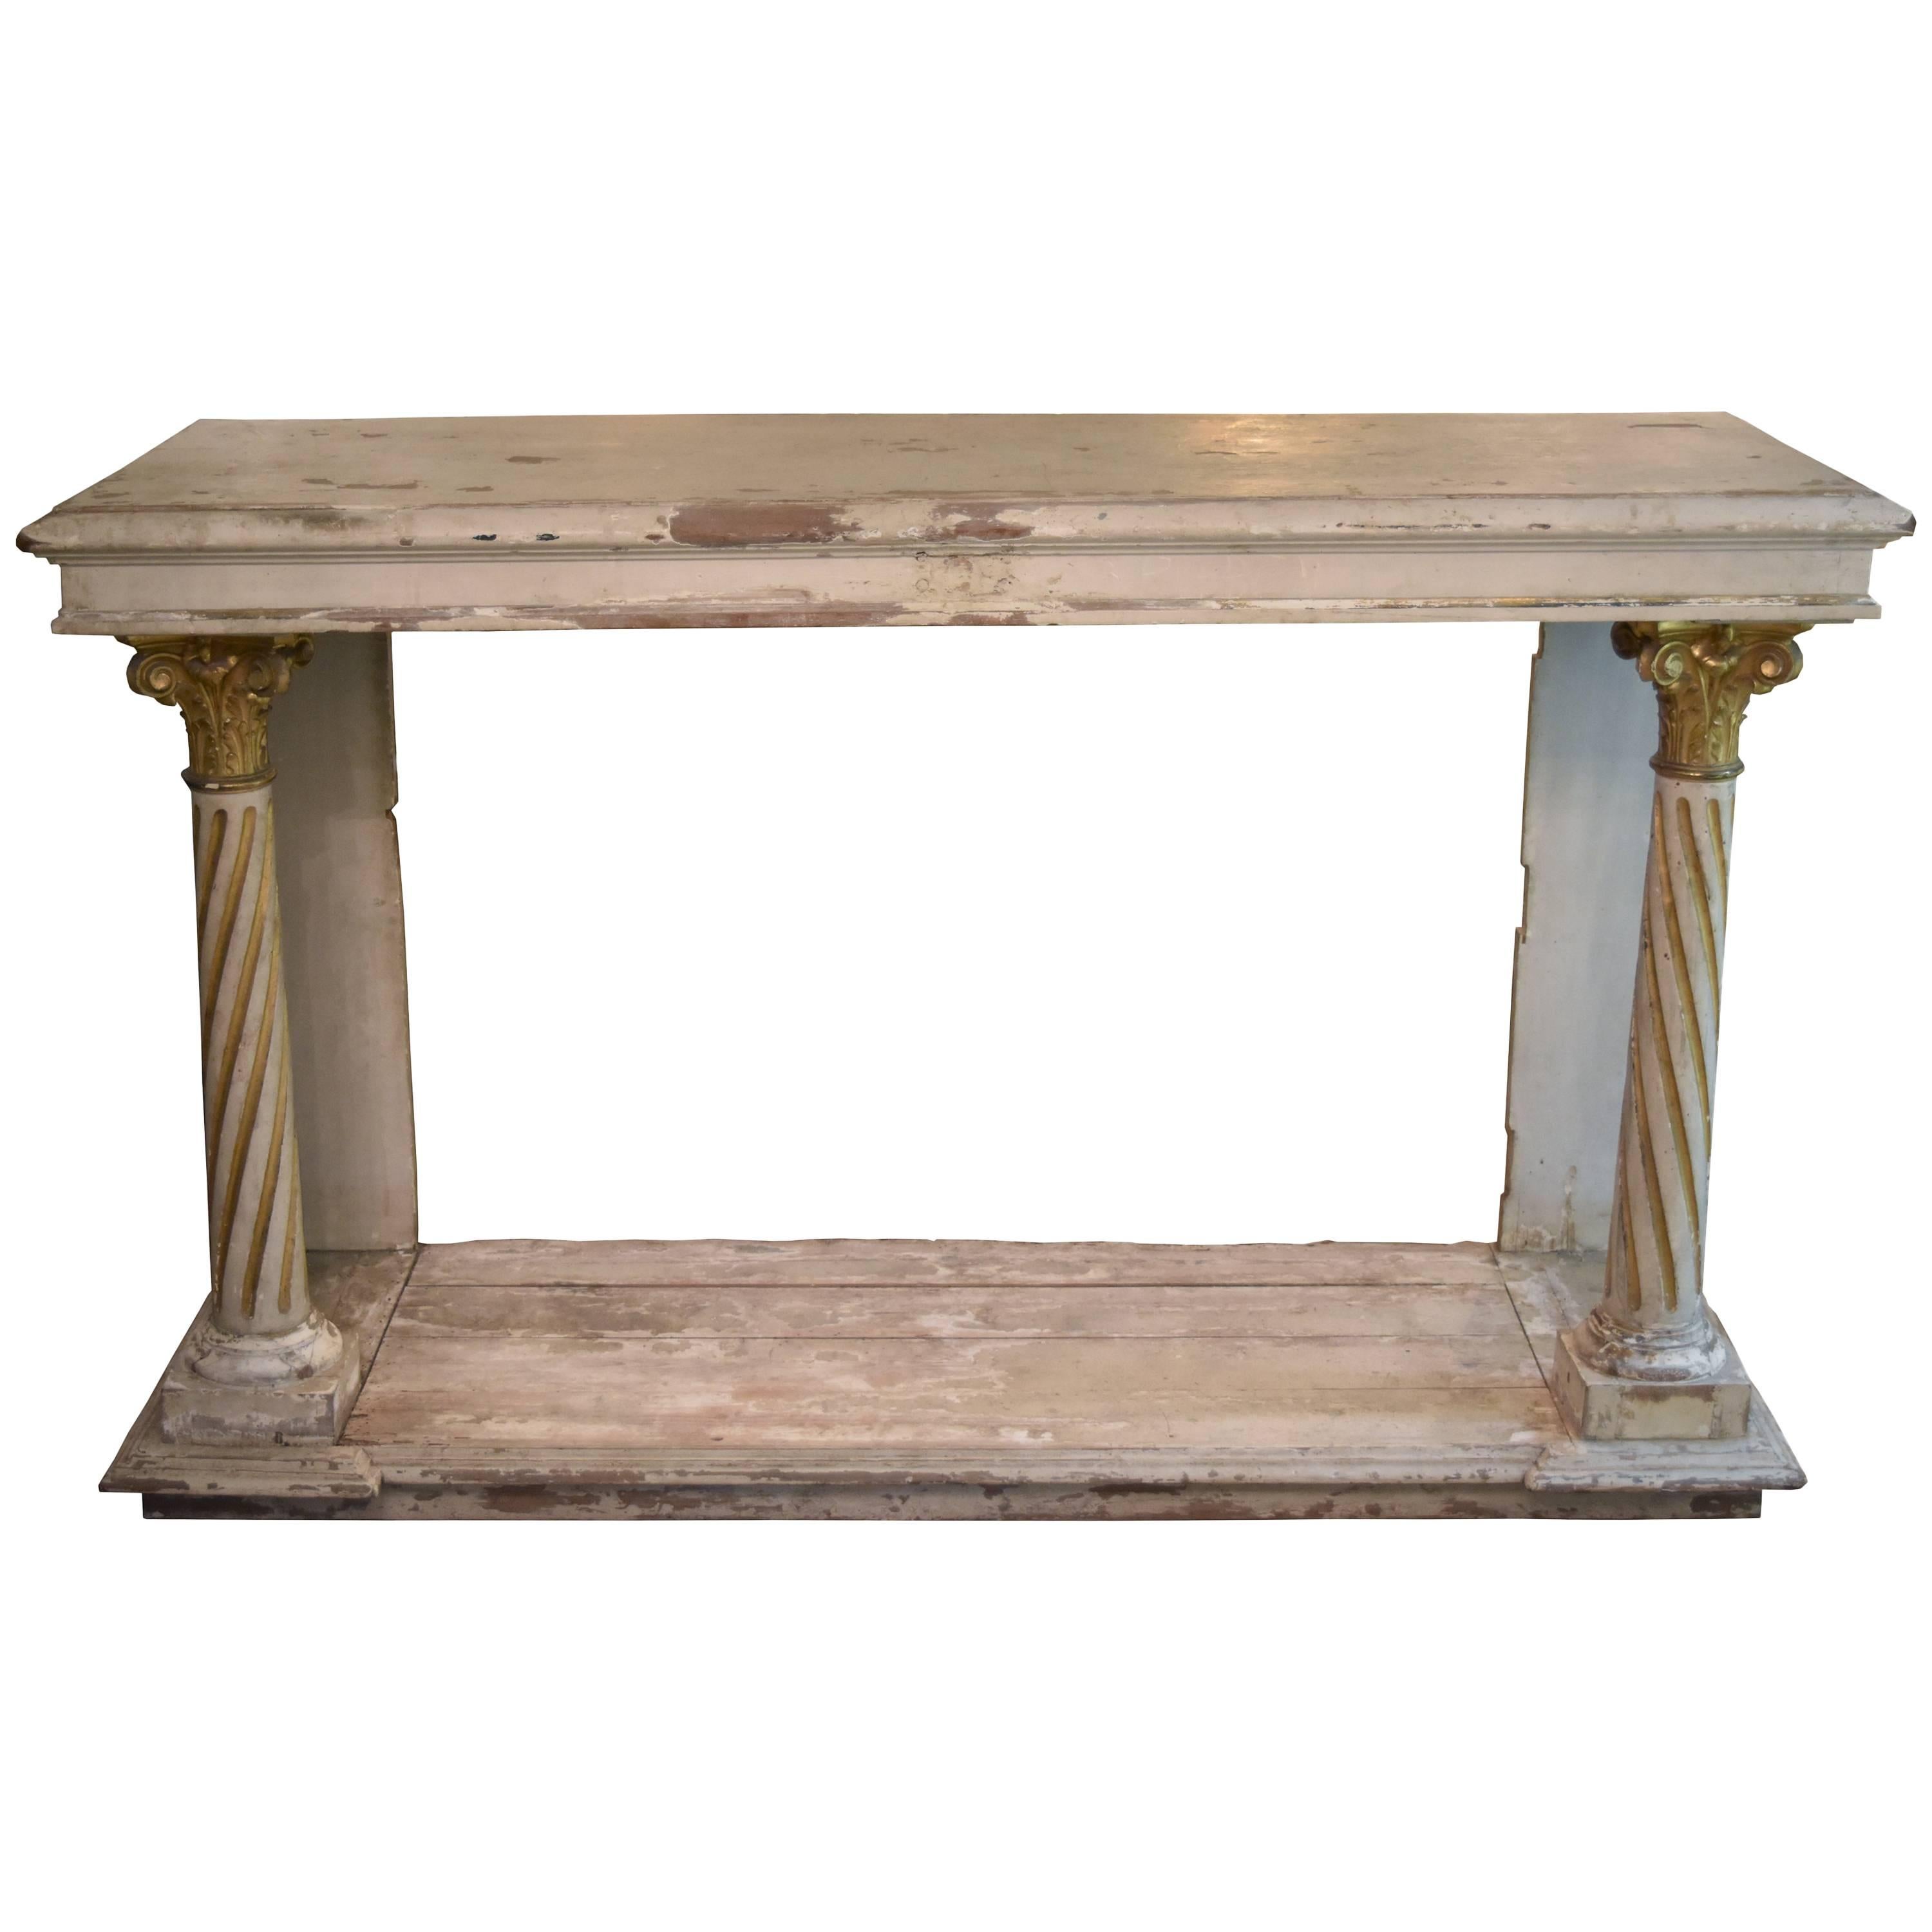 Large 19th Century, Italian Painted Console